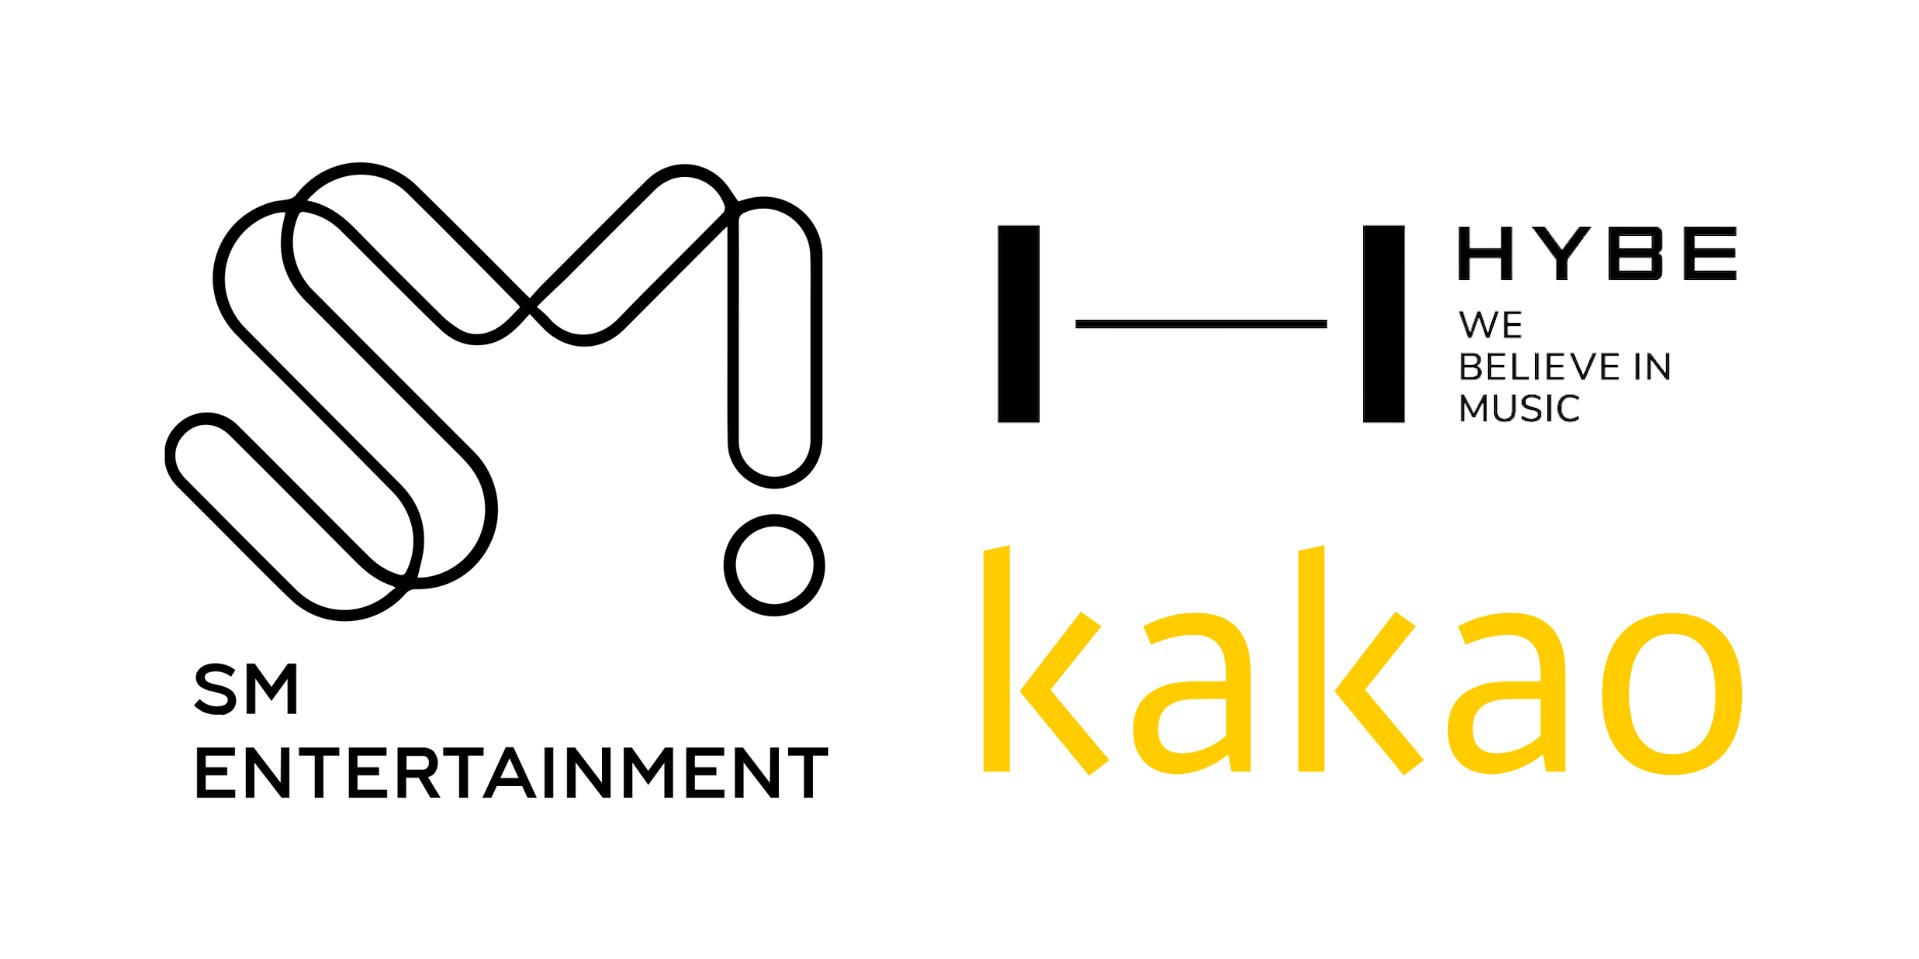 HYBE to discontinue acquisition of SM Entertainment and its management rights; agrees to cooperate with Kakao on platform-related concerns